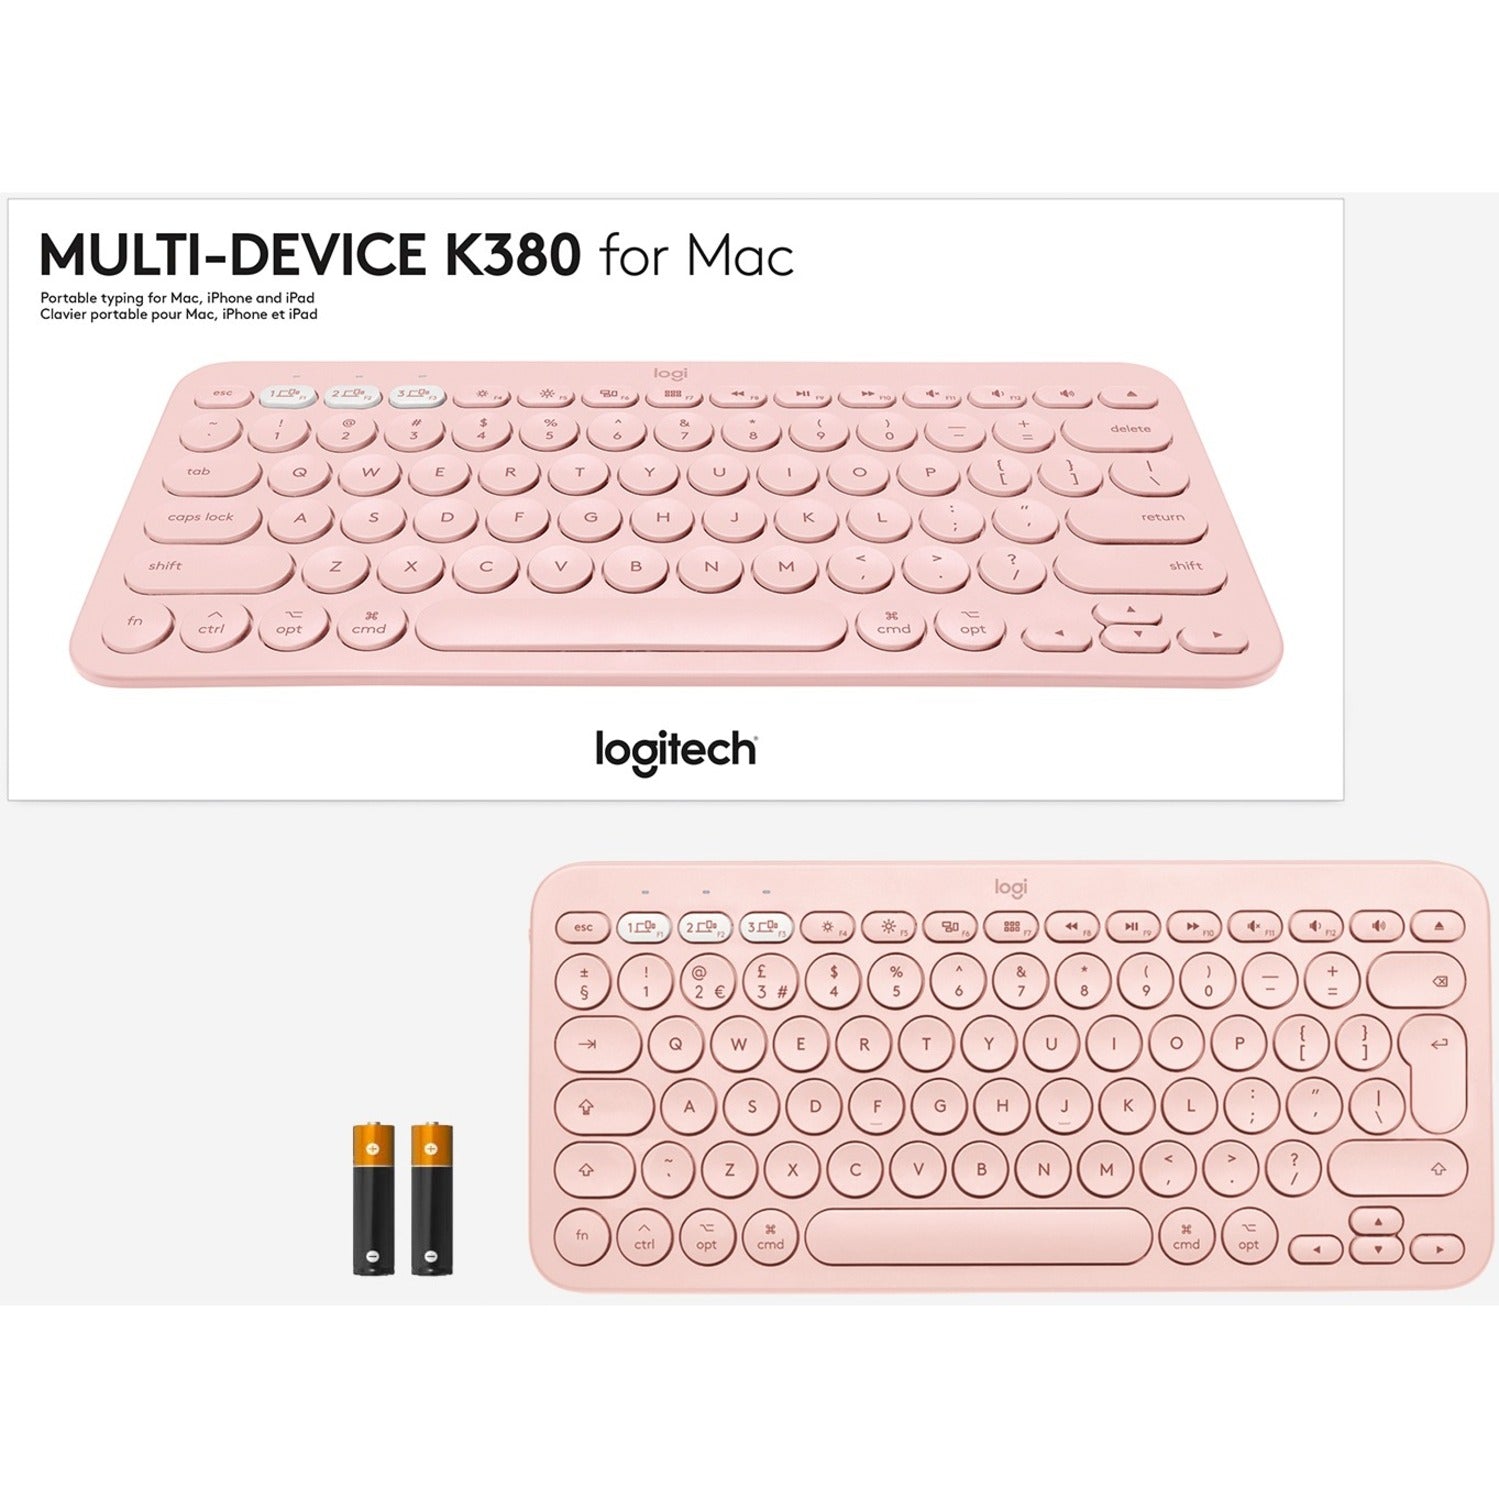 Logitech 920-009728 K380 Multi-device Bluetooth Keyboard for Mac, Compact and Lightweight with Multi-host Support